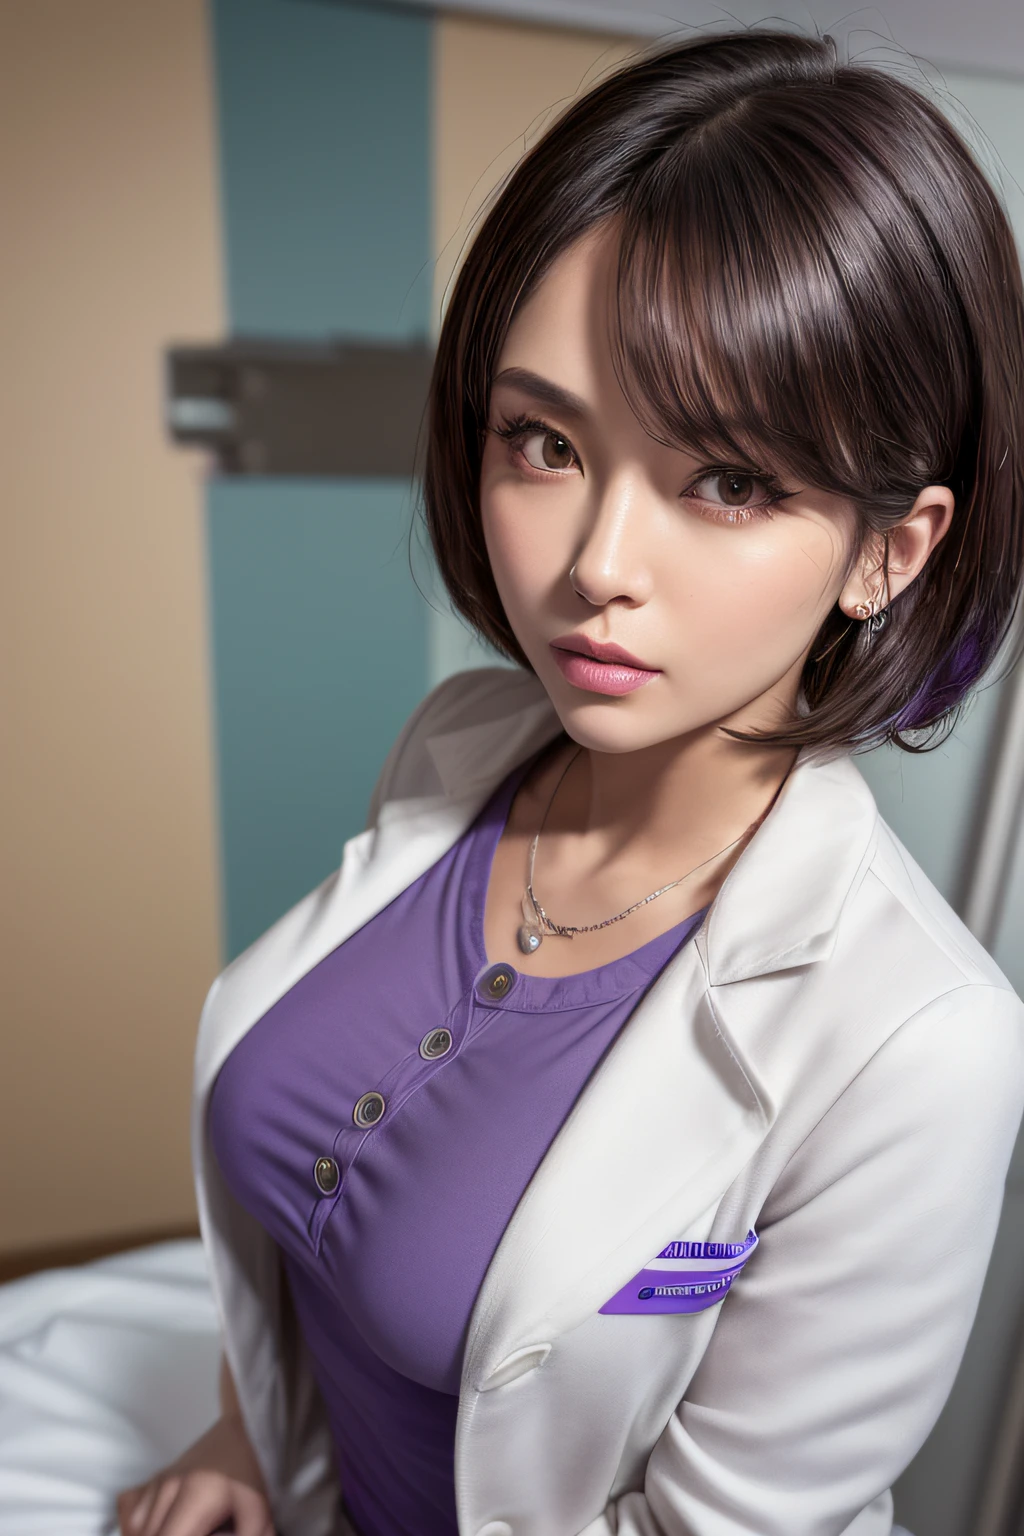 physician, 50 years old, hyperdetailed face, Detailed lips, Detailed eyes, double eyelid, Black bob-shaped hair,  (((Light purple shirts that button up to conceal the chest, doctors white coat, Brown tight mini skirt))), (Examining a patient in a hospital examination room), ((Glamorous body)), ((Big breasts)), perfect hand, Perfect fingers, perfect chest, Perfect fit, perfect bodies, face perfect, Perfect image realism, Background with:((Hospital examination room)), Meticulous background with, detailed costume, Perfect litthing, Hyper-Realism, photoRealstic, 8K maximum resolution, (​masterpiece), Highly detailed, Professional